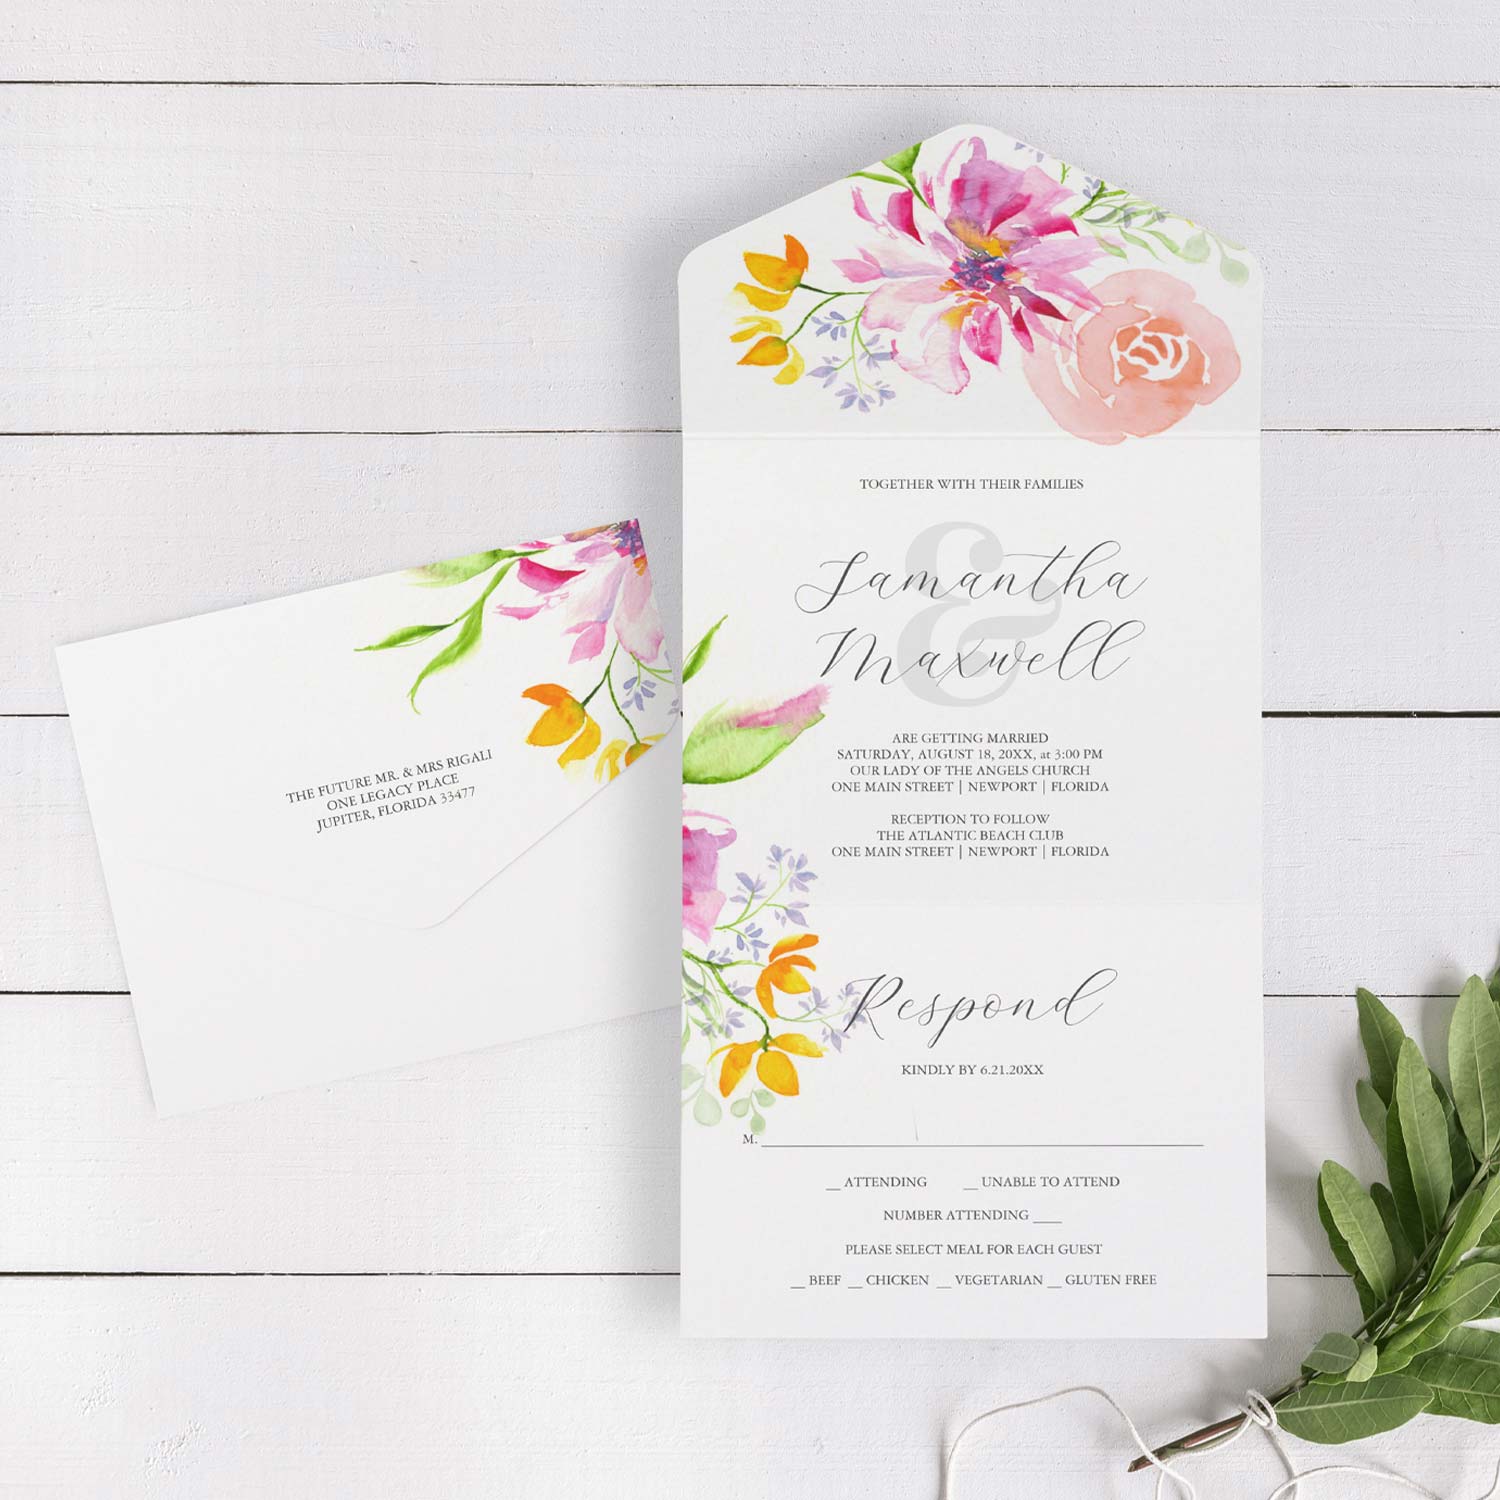 Click the image to explore the complete line of wedding invitations with rsvp cards featuring unique watercolor art by Victoria Grigaliunas of Do Tell A Belle.